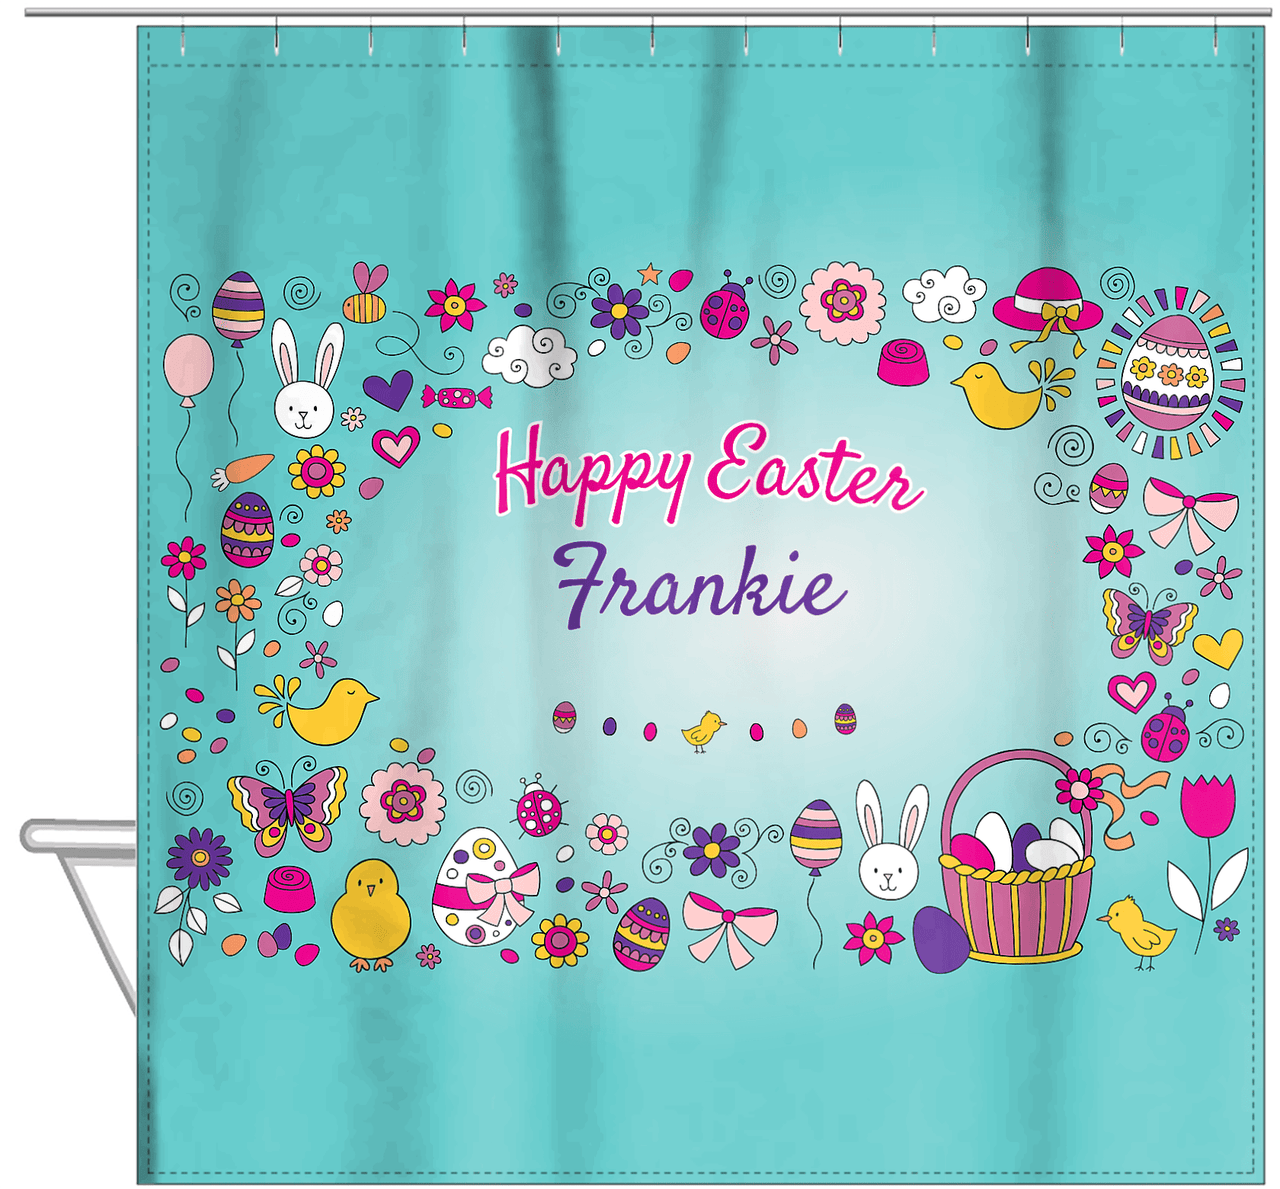 Personalized Easter Shower Curtain I - Easter Doodle - Teal Background - Hanging View